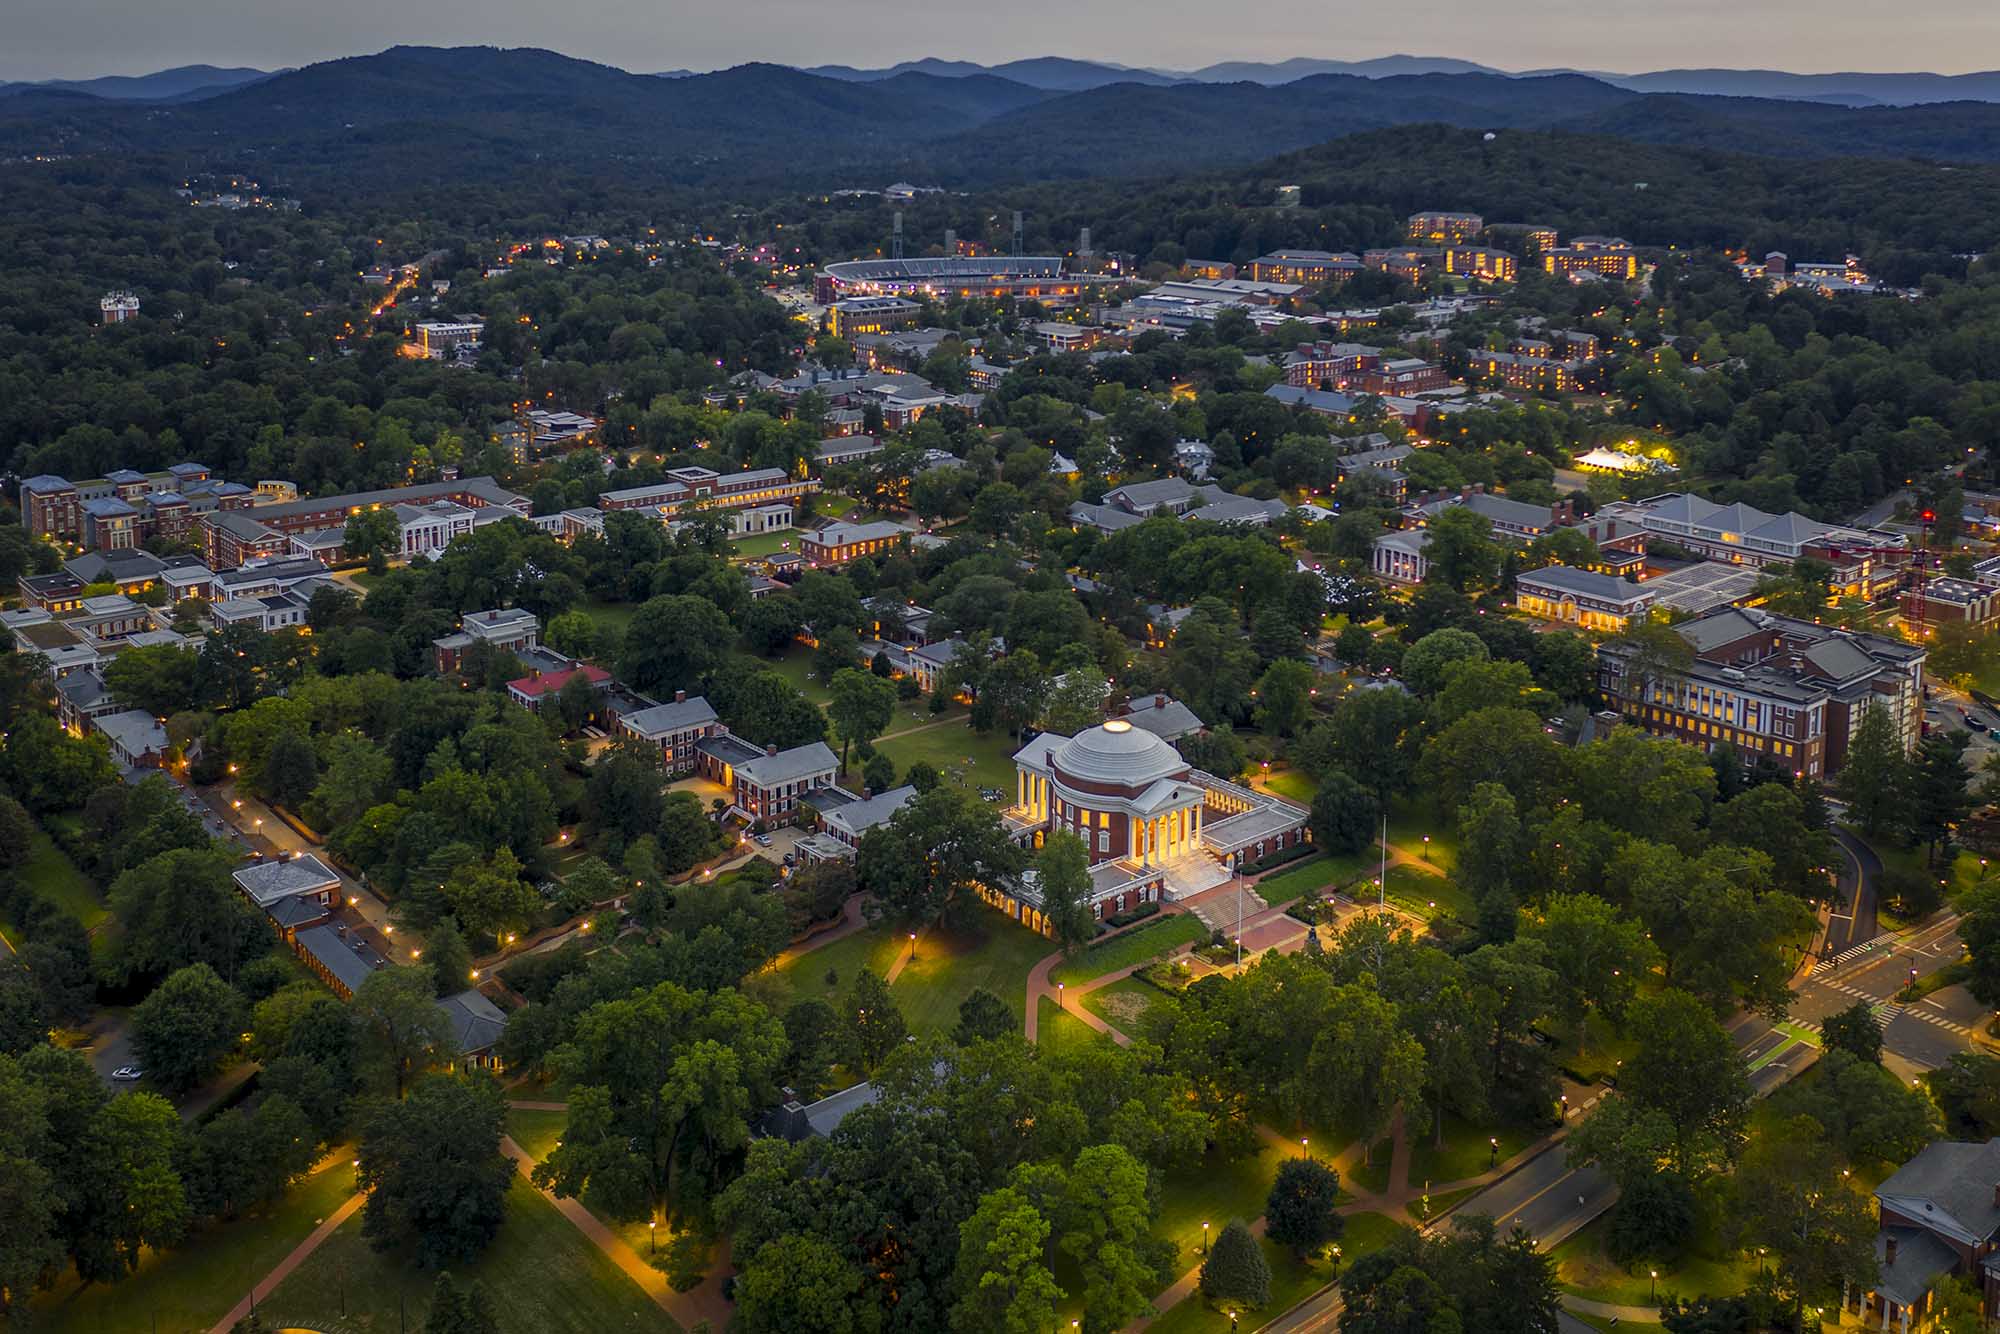 Aerial view of the Rotunda, the Lawn, and surrounding buildings at dusk